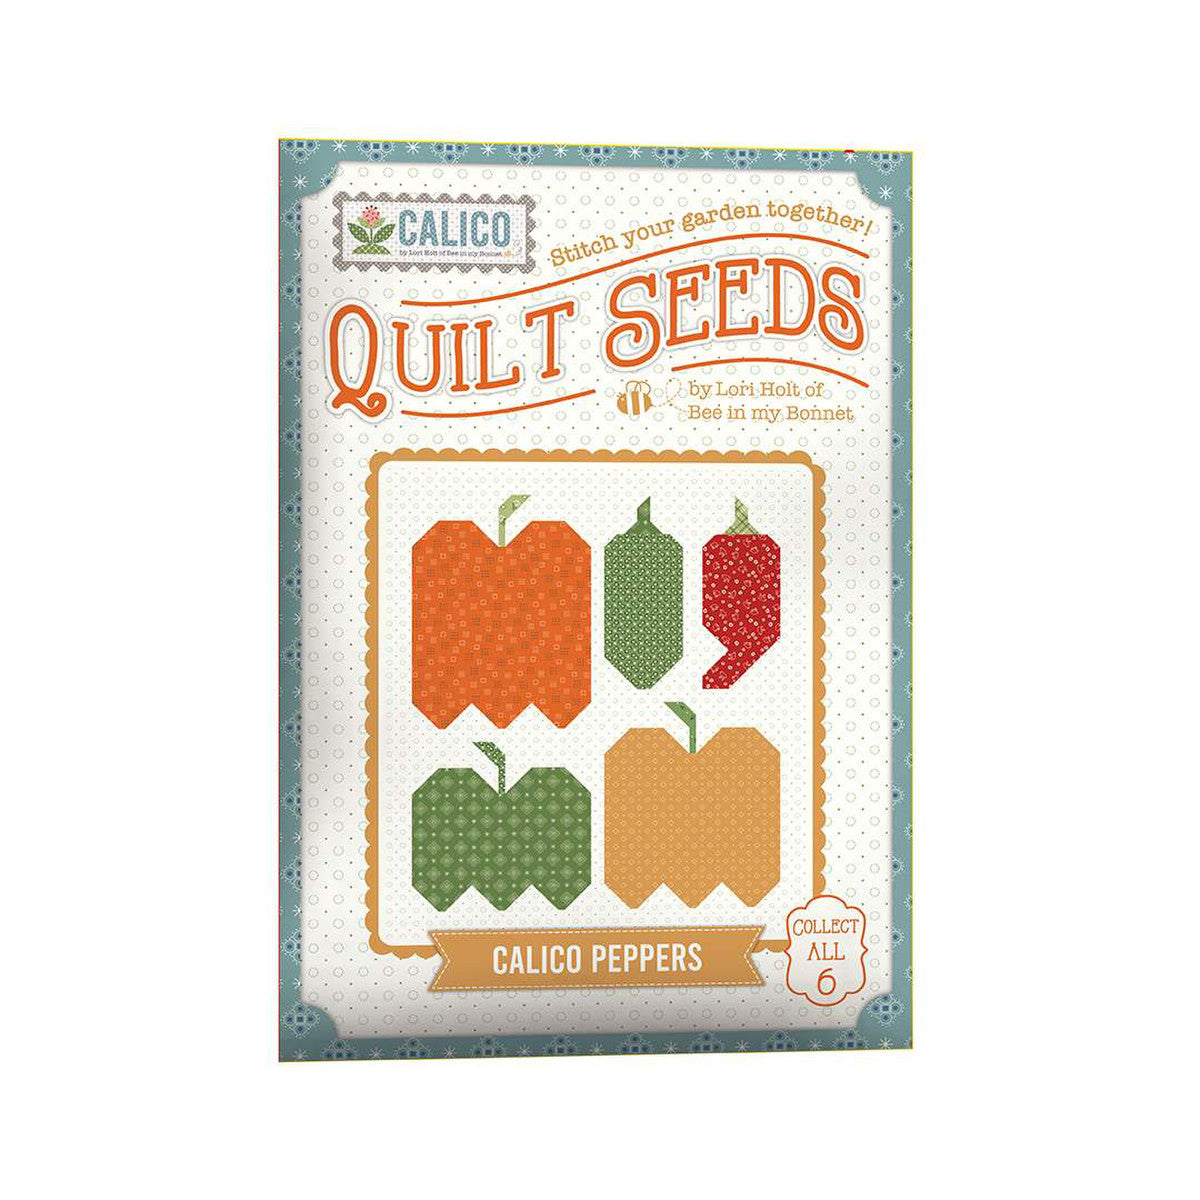 Quilt Seeds Block Pattern Calico Peppers